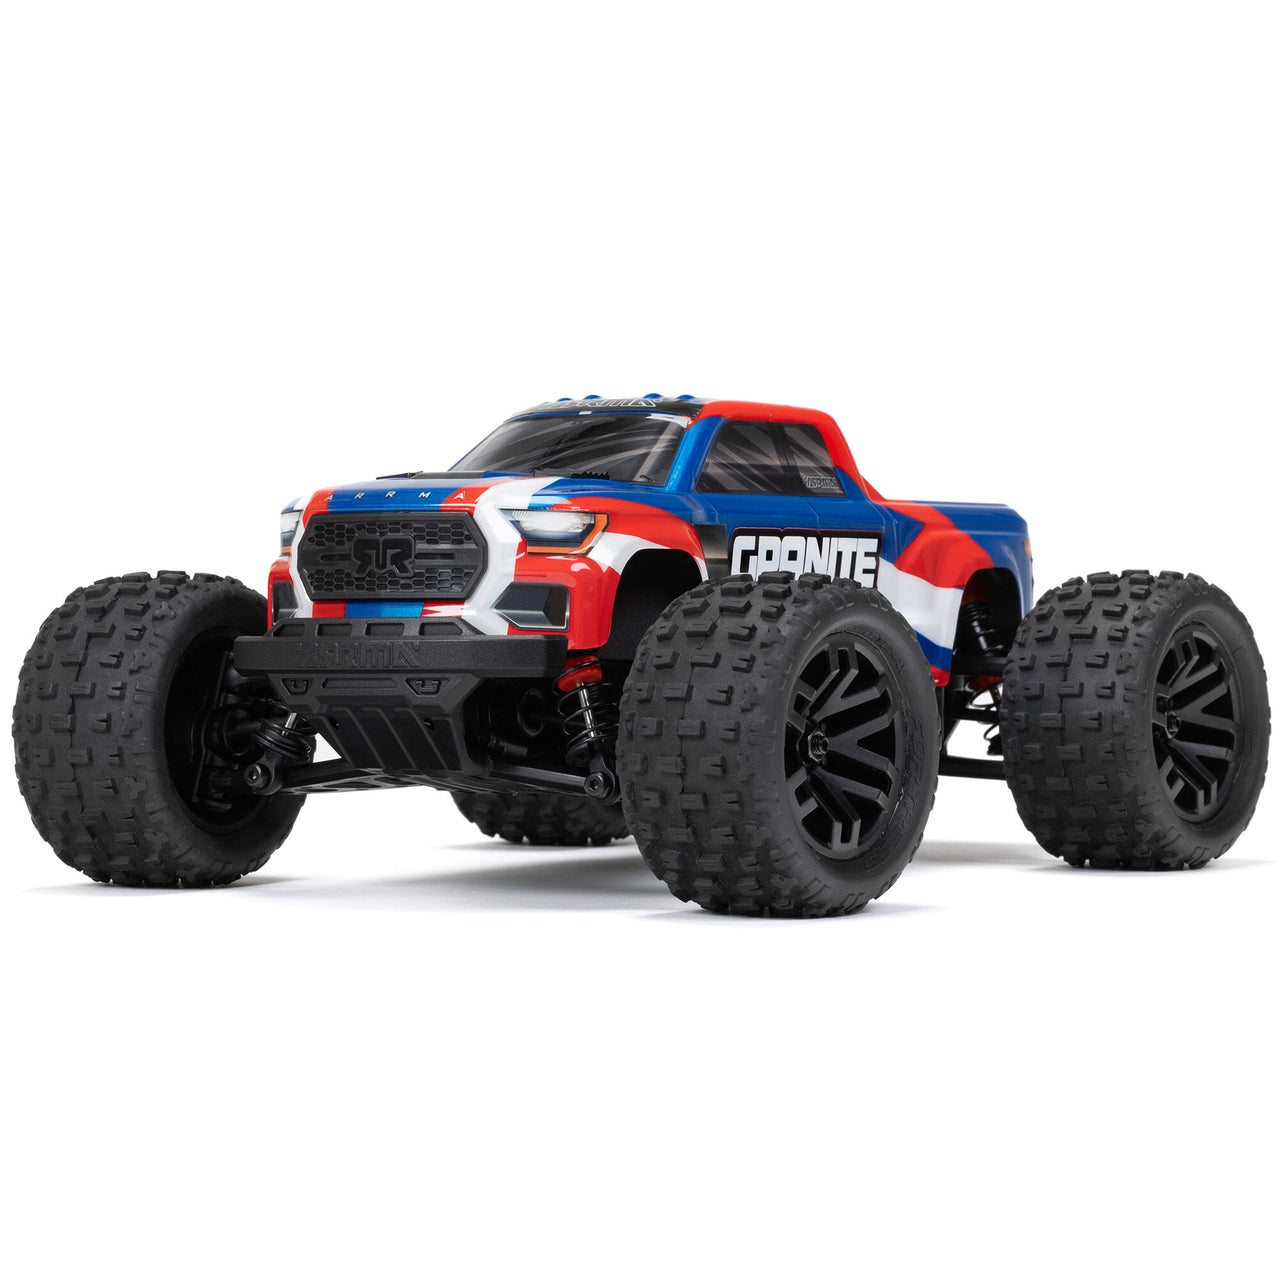 ARA2102T1 1/18 GRANITE GROM MEGA 380 Brushed 4X4 Monster Truck RTR with Battery & Charger, Blue